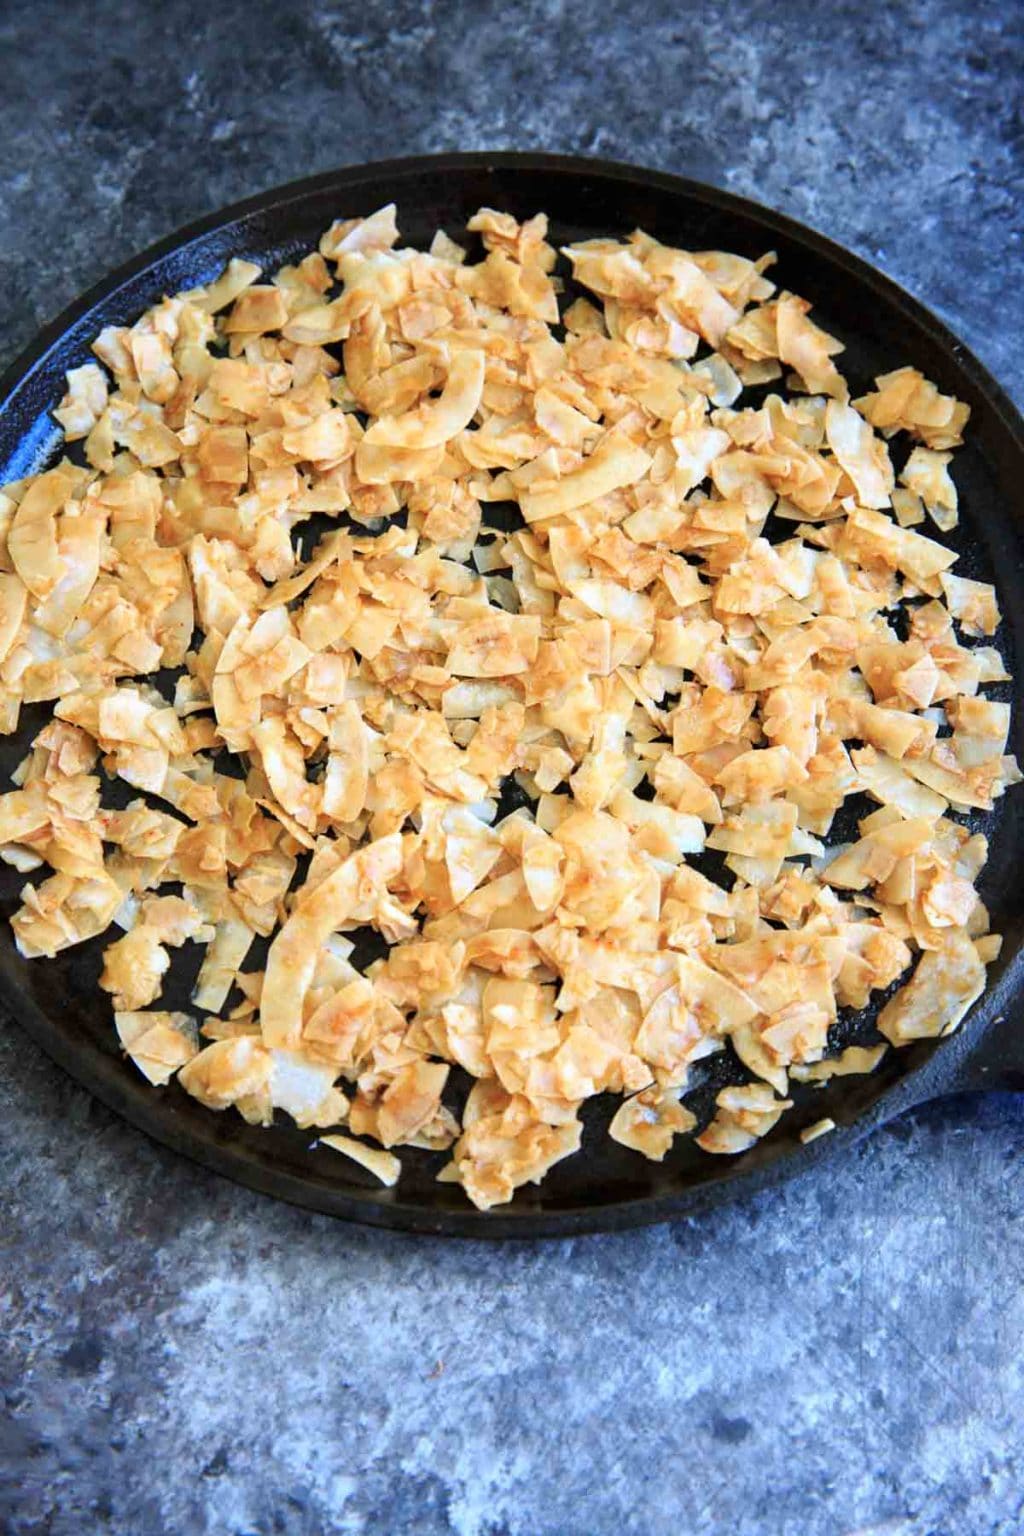 Coconut Chips spread out on cast iron pan before baking into vegan bacon